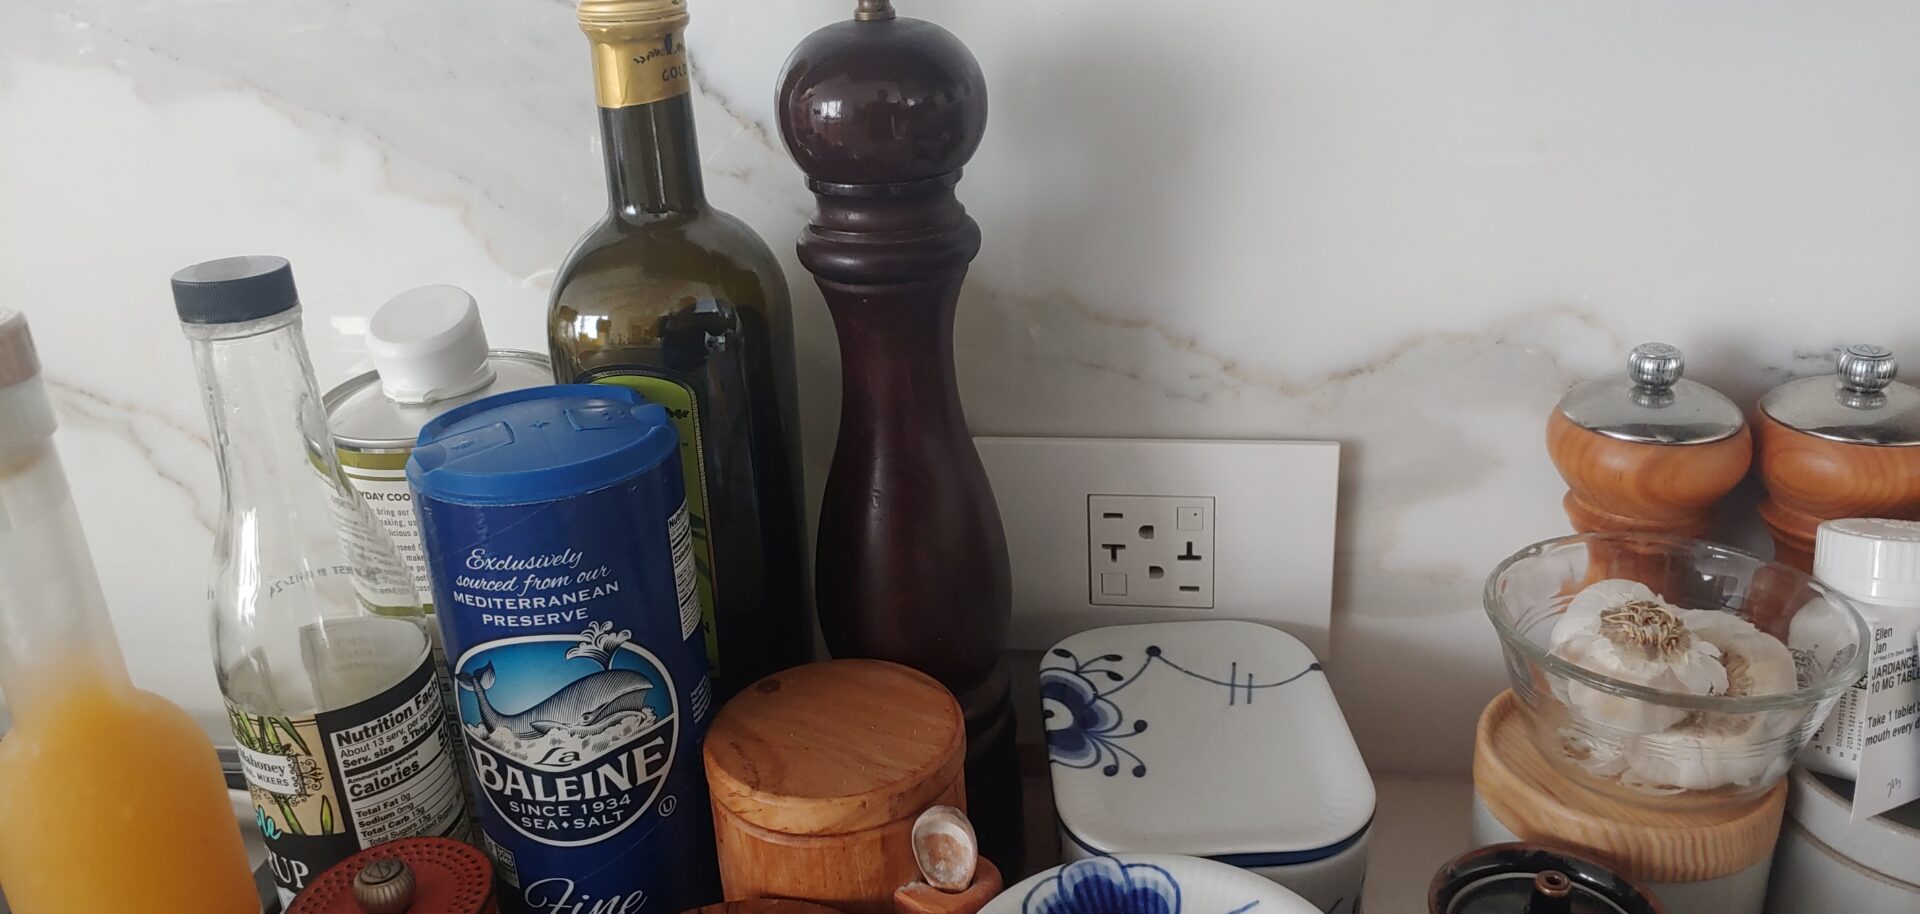 Condiments and cooking ingredients beside a white electrical socket